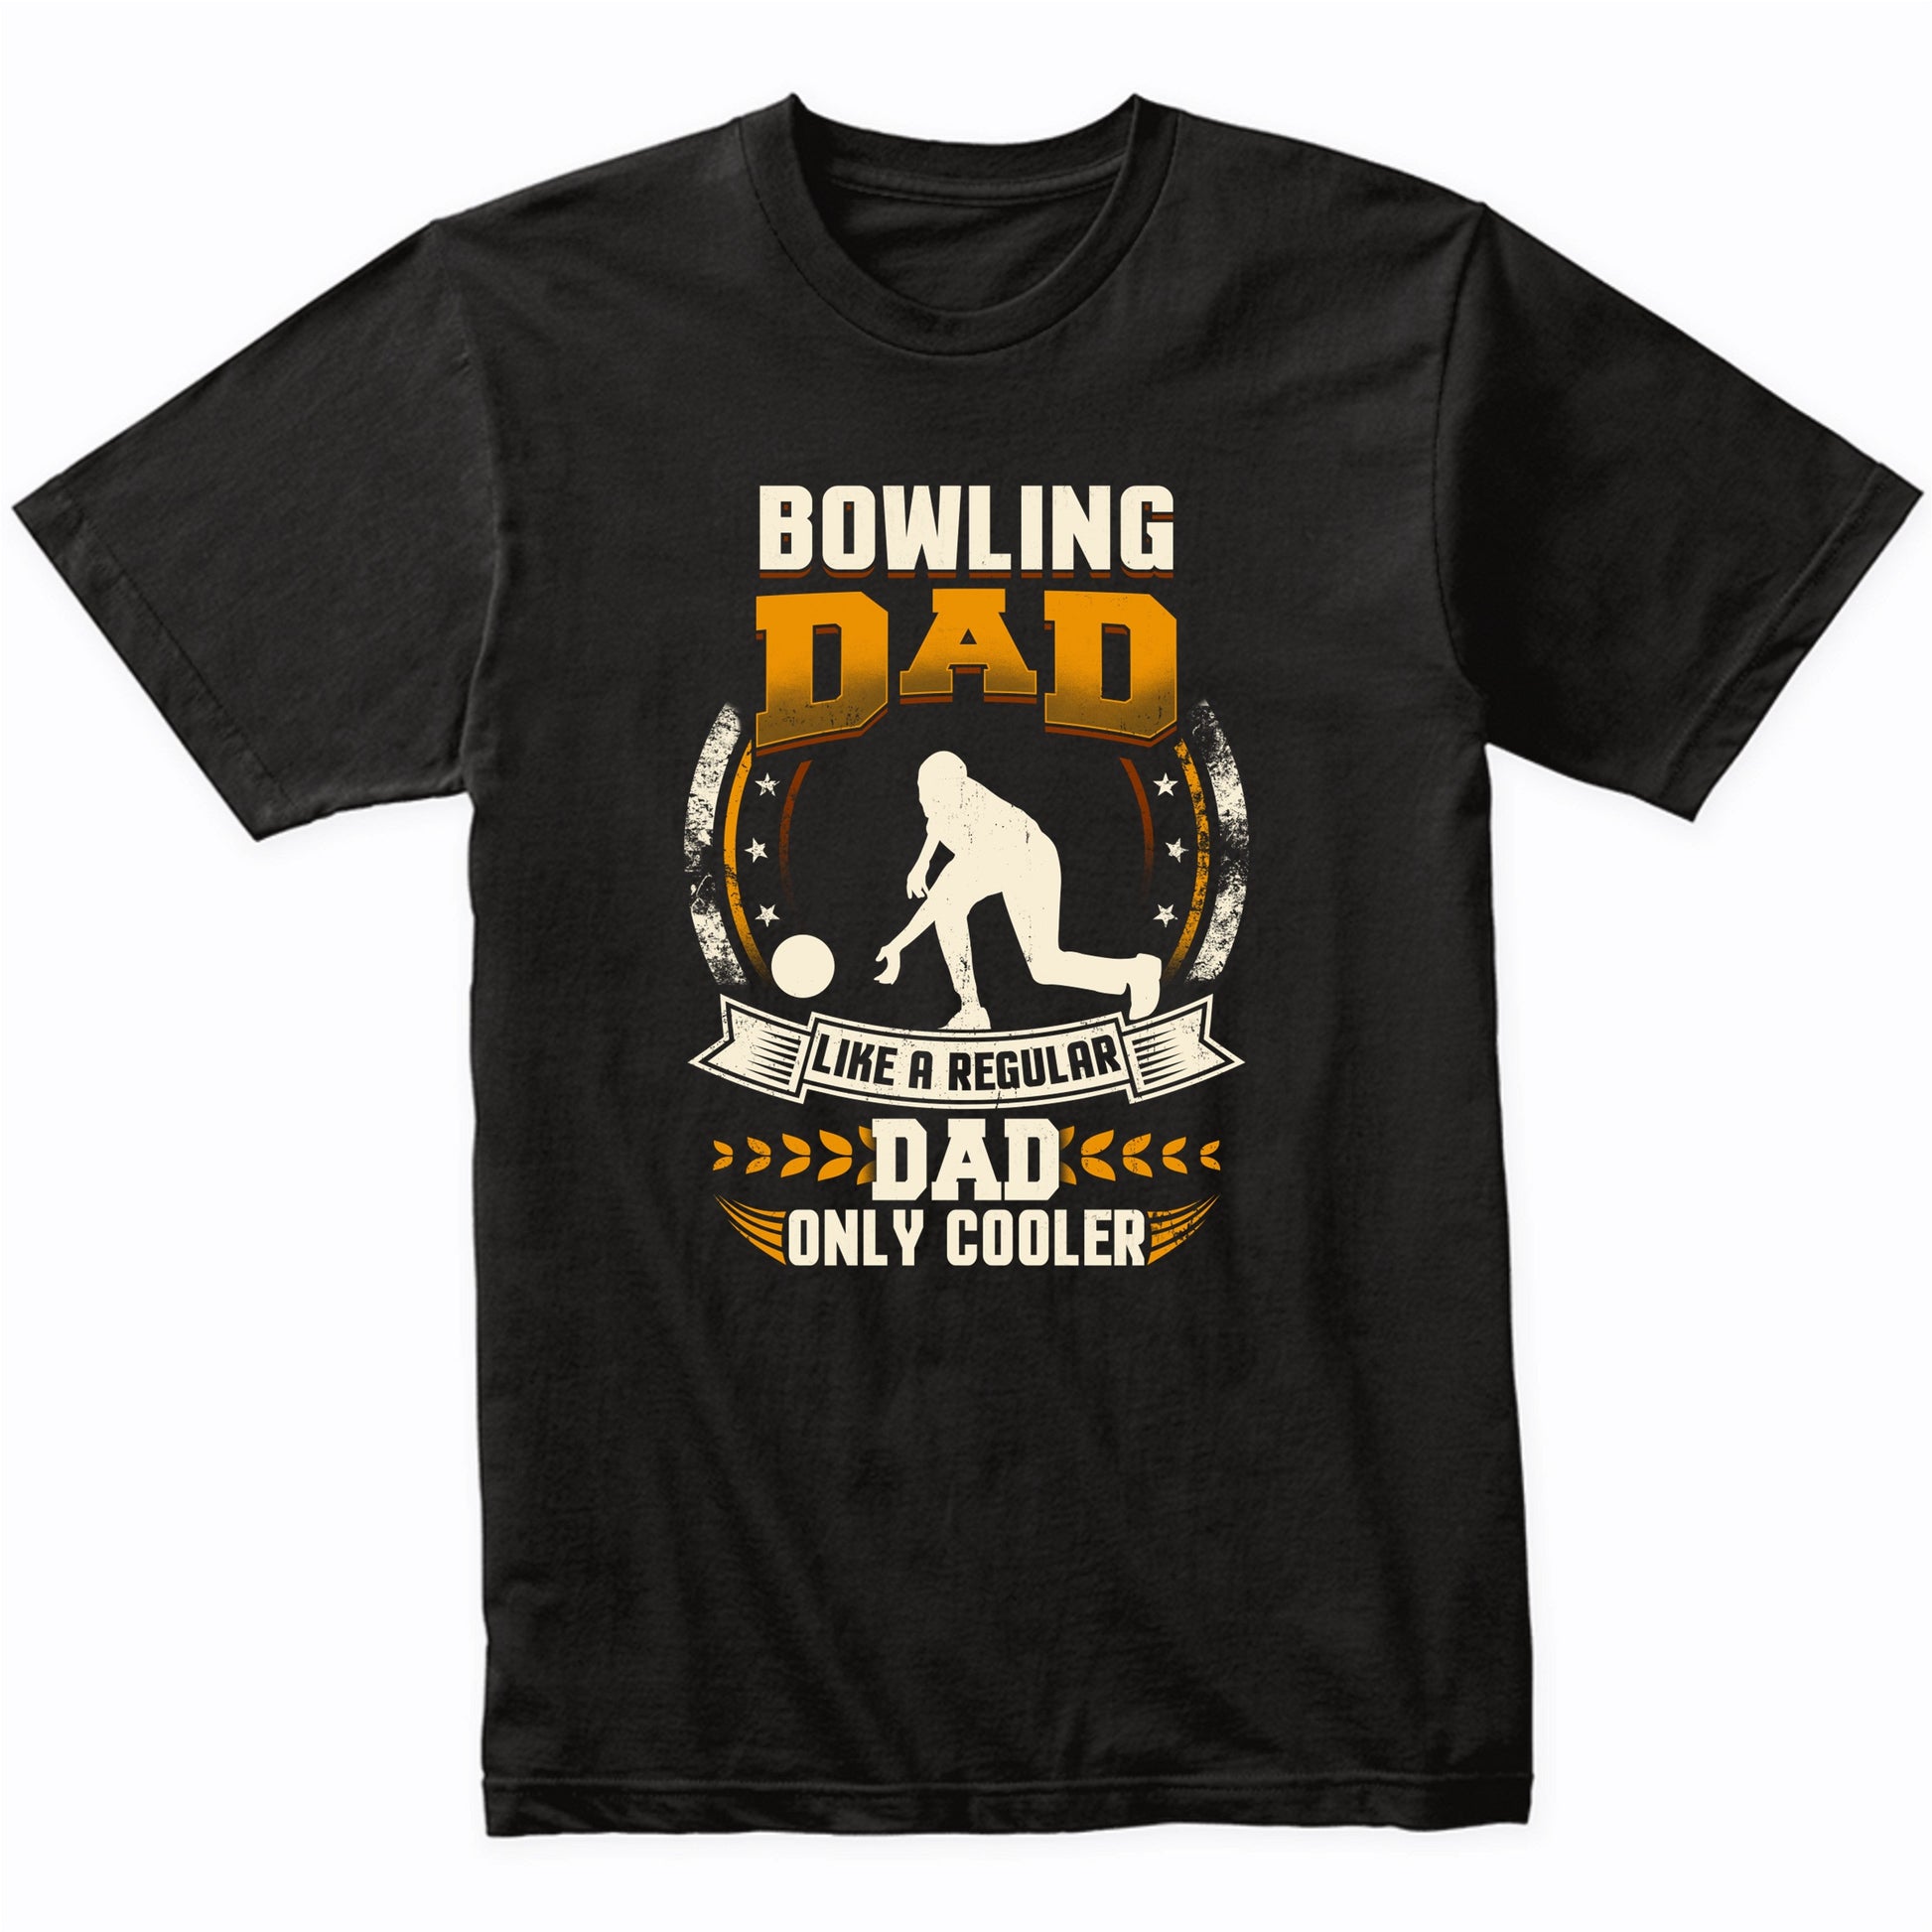 Bowling Dad Like A Regular Dad Only Cooler Funny T-Shirt